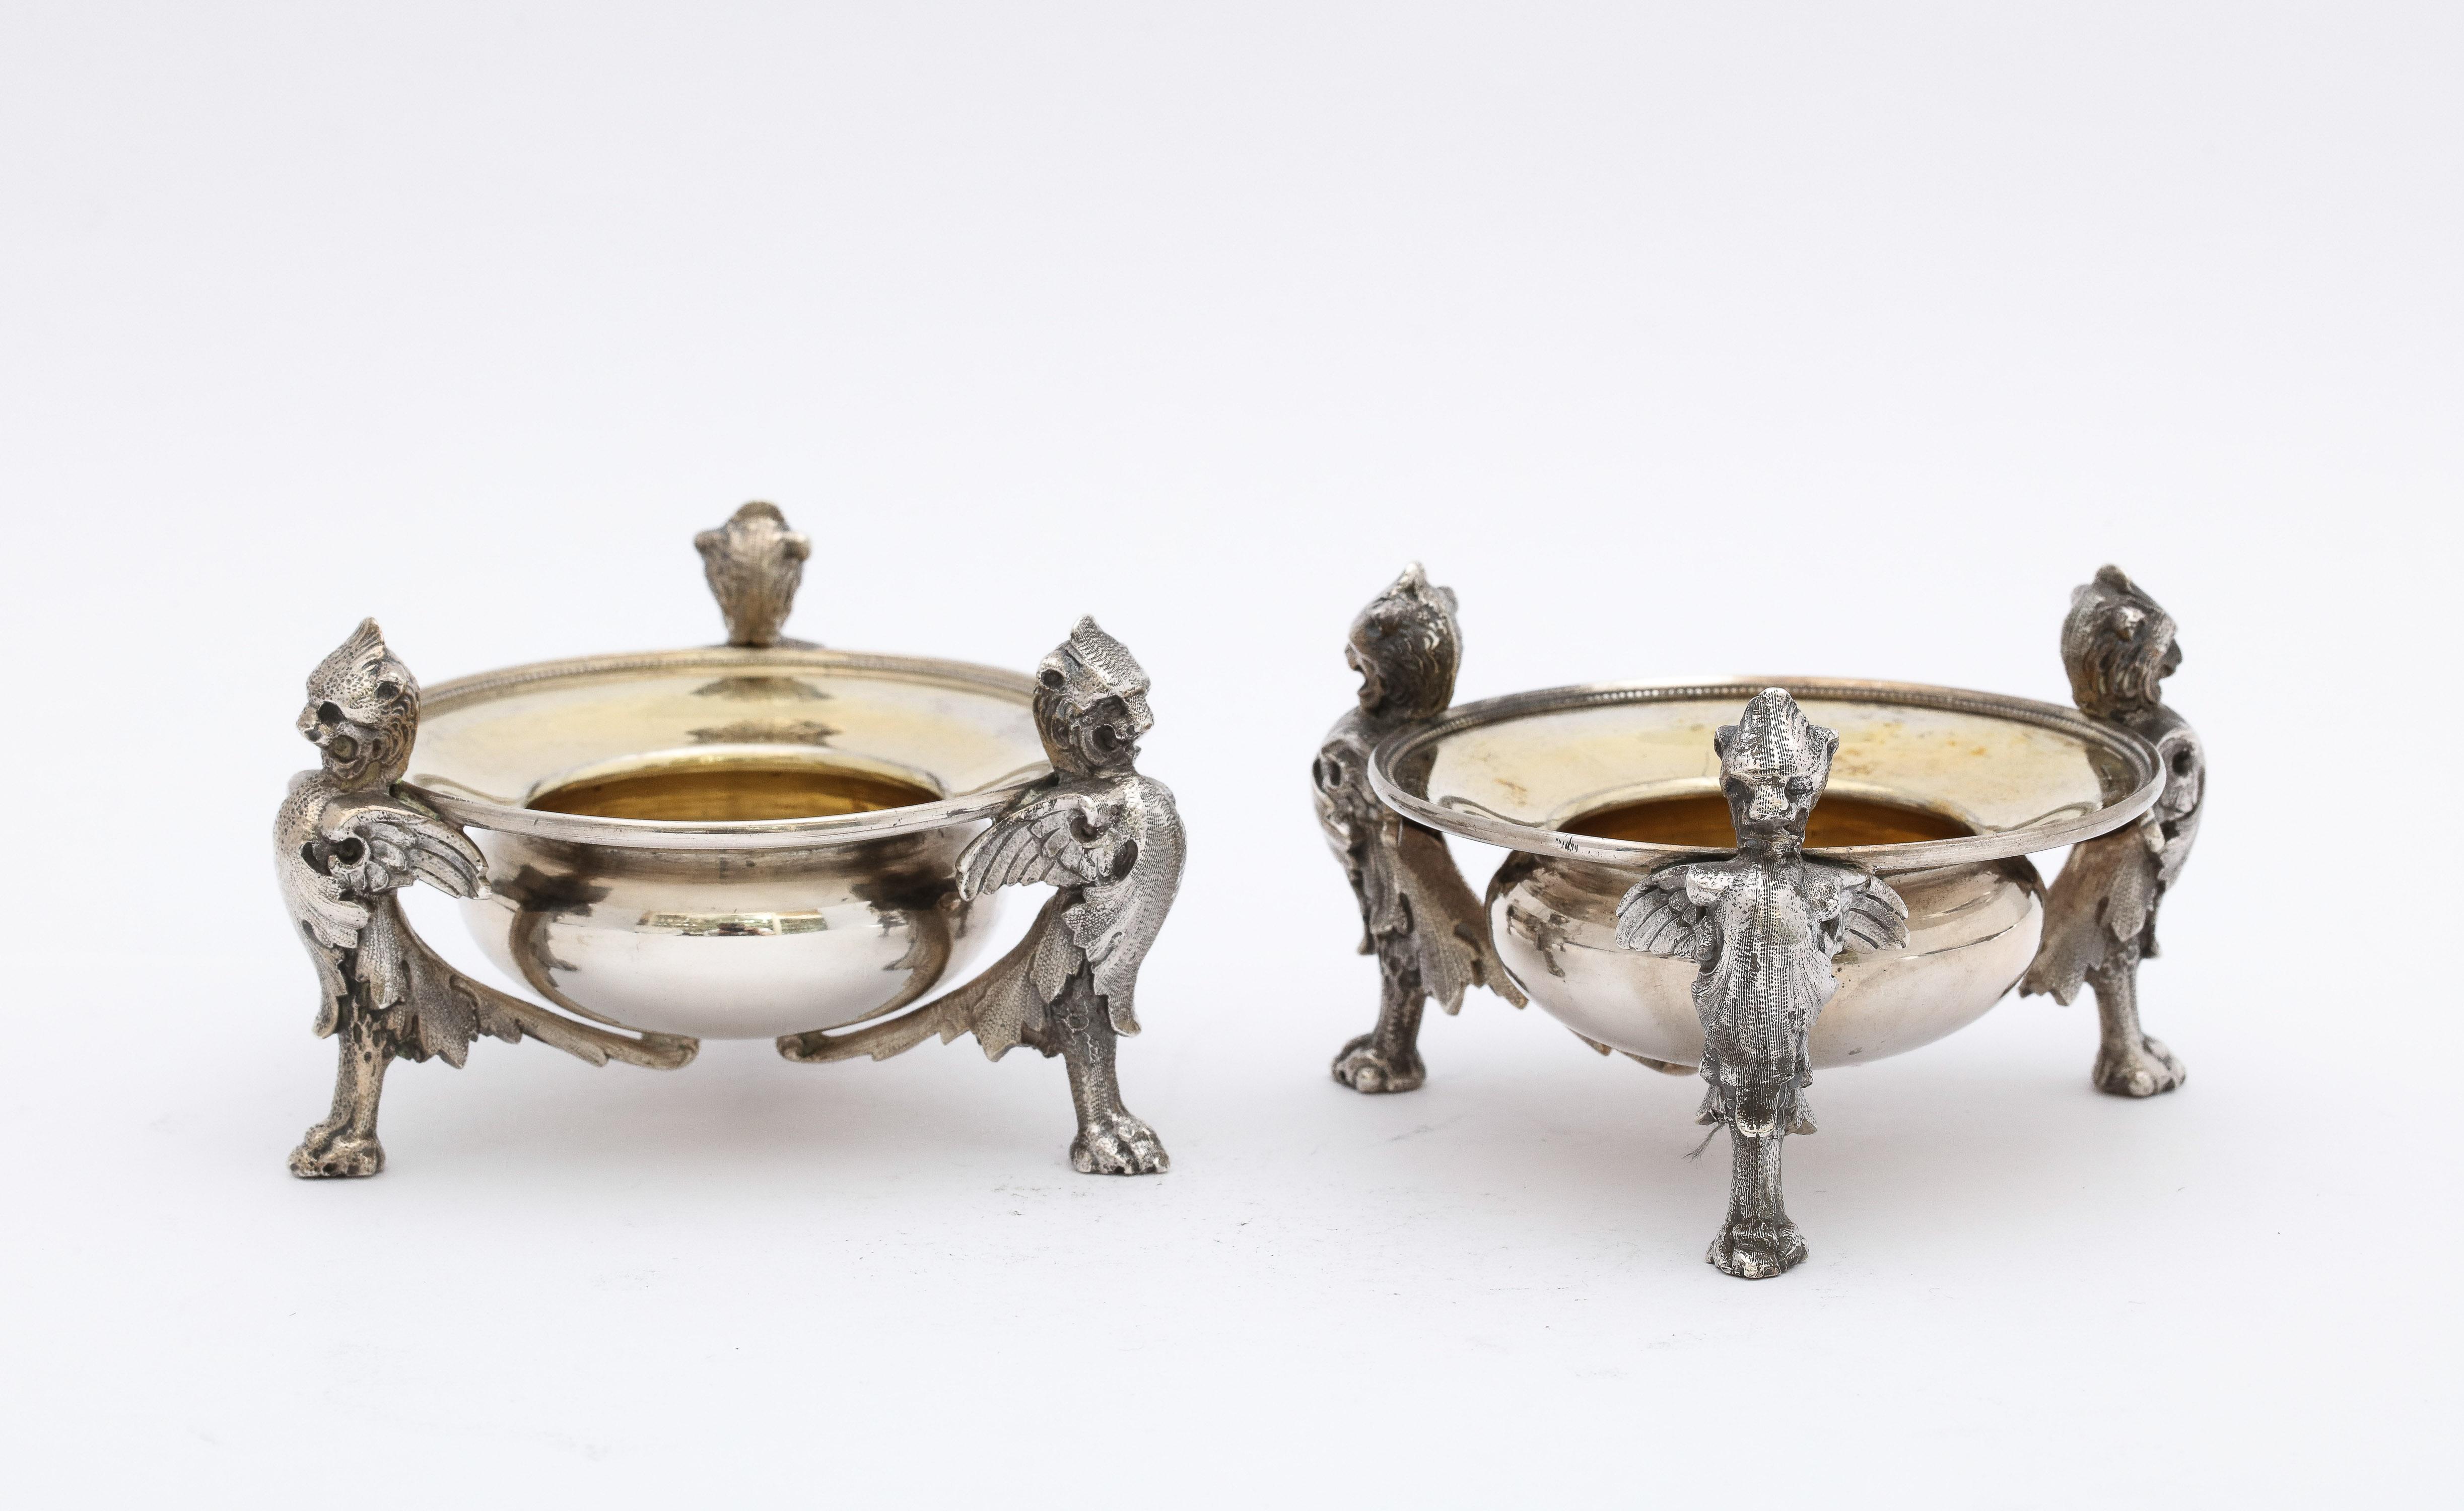 Pair of Neoclassical-Style Parcel Gilt Coin Silver Footed Salt Cellars By Gorham For Sale 7